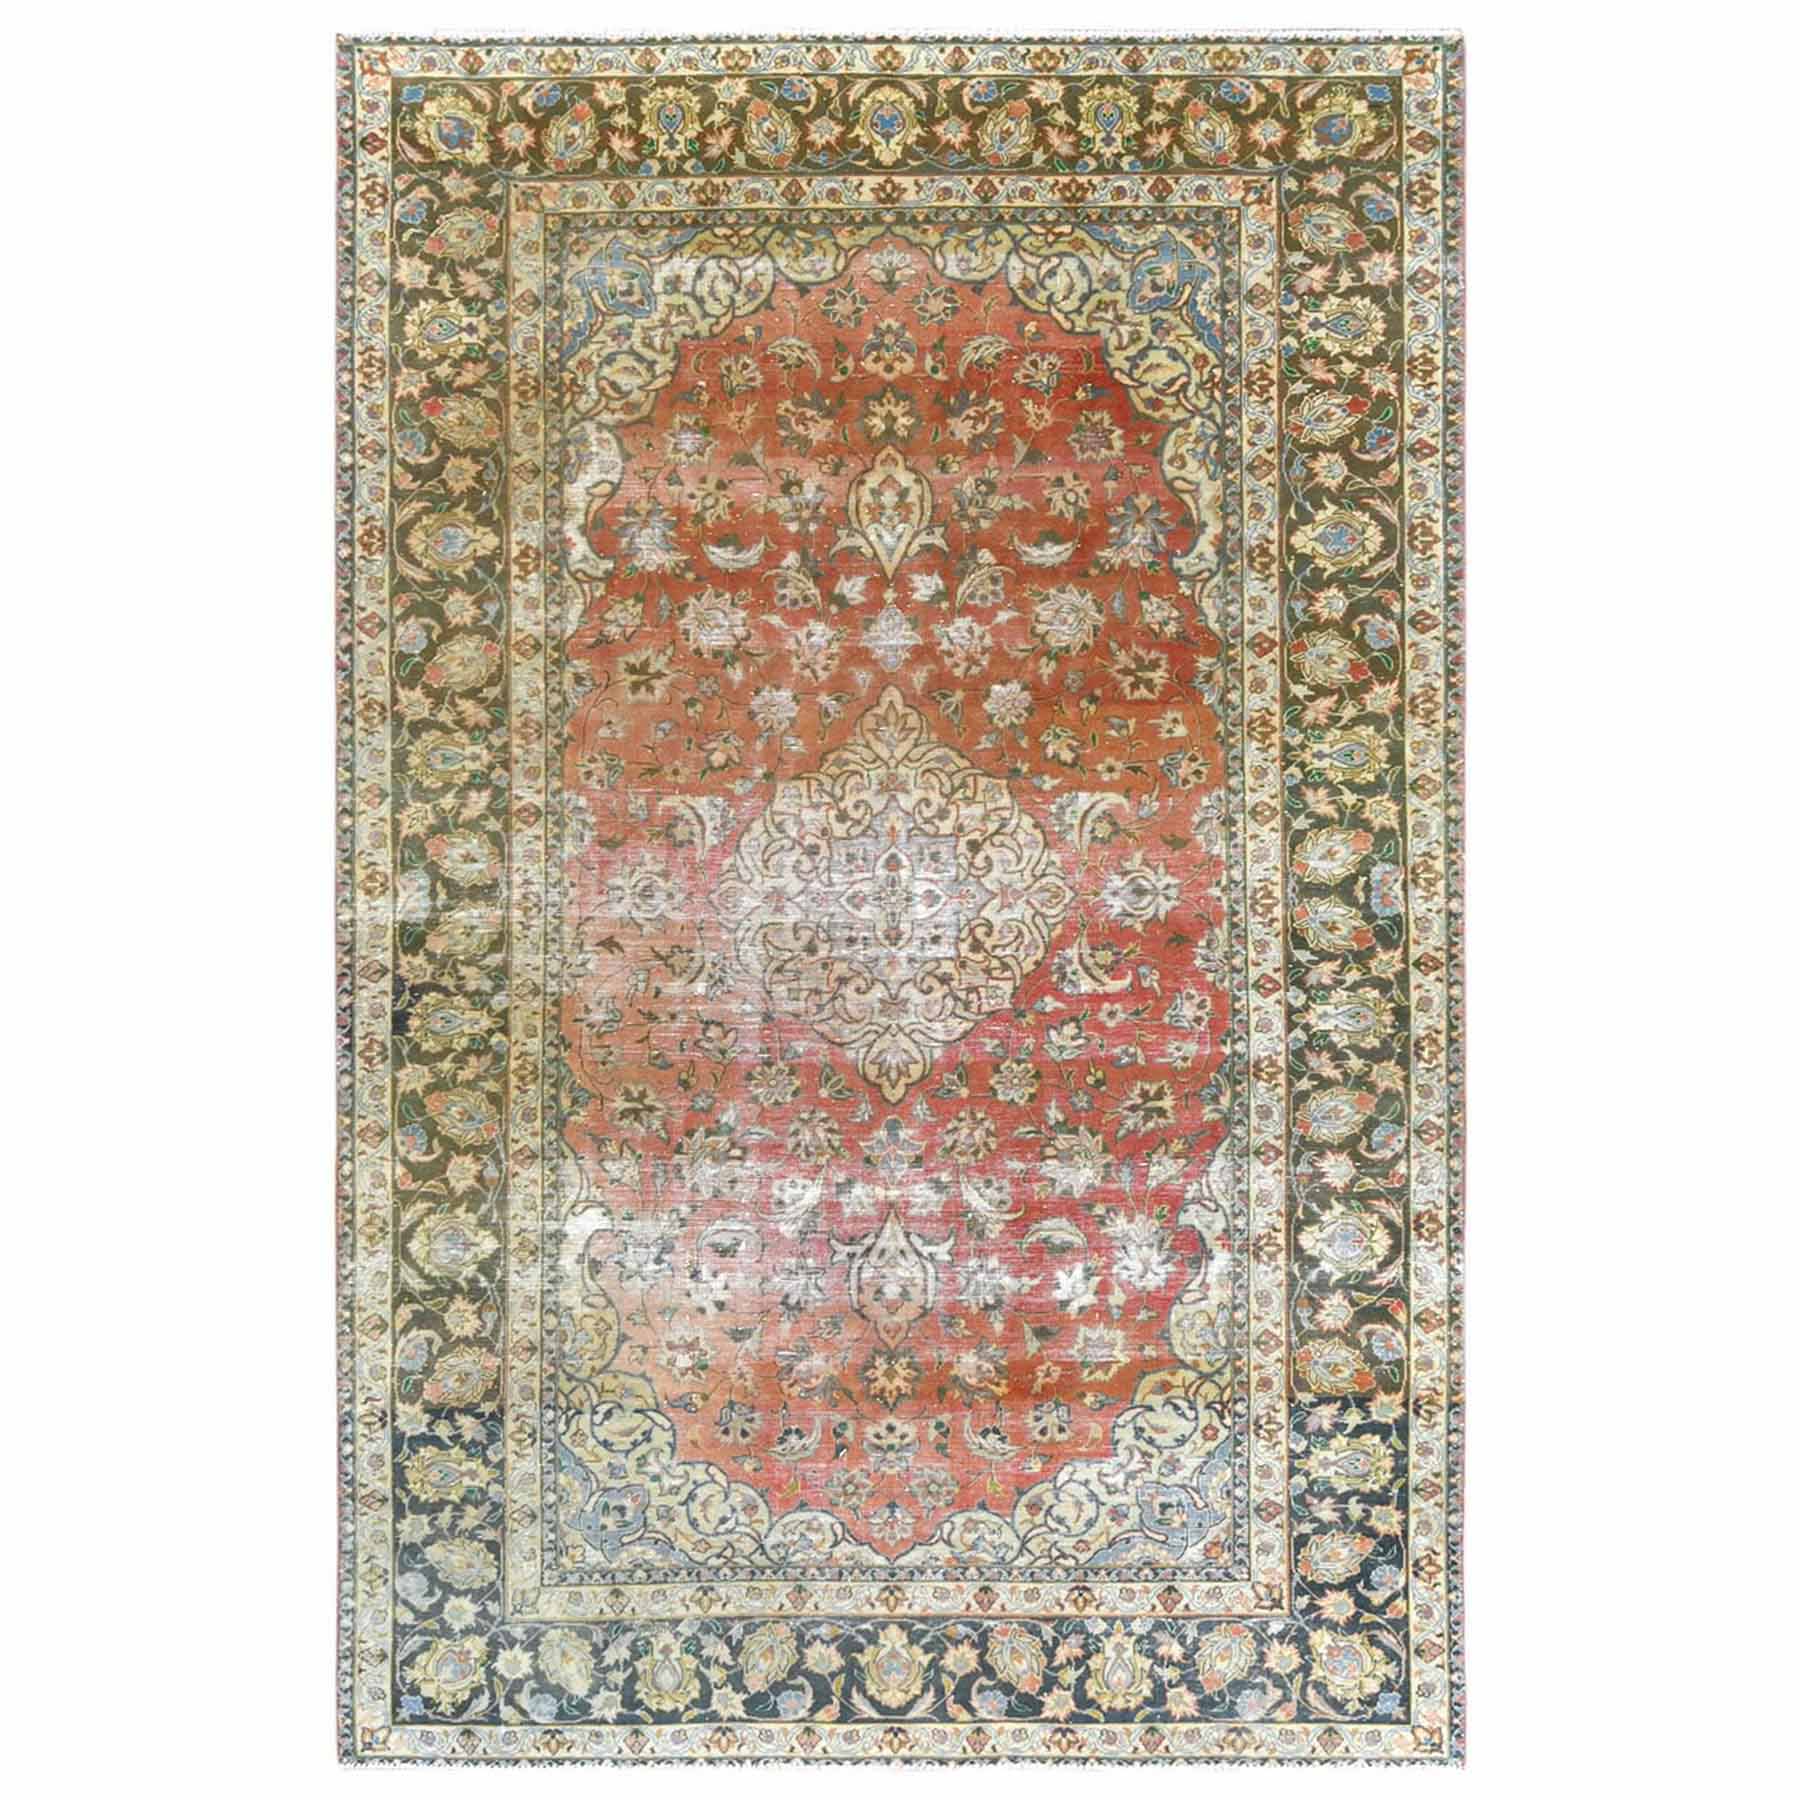 Overdyed-Vintage-Hand-Knotted-Rug-308150